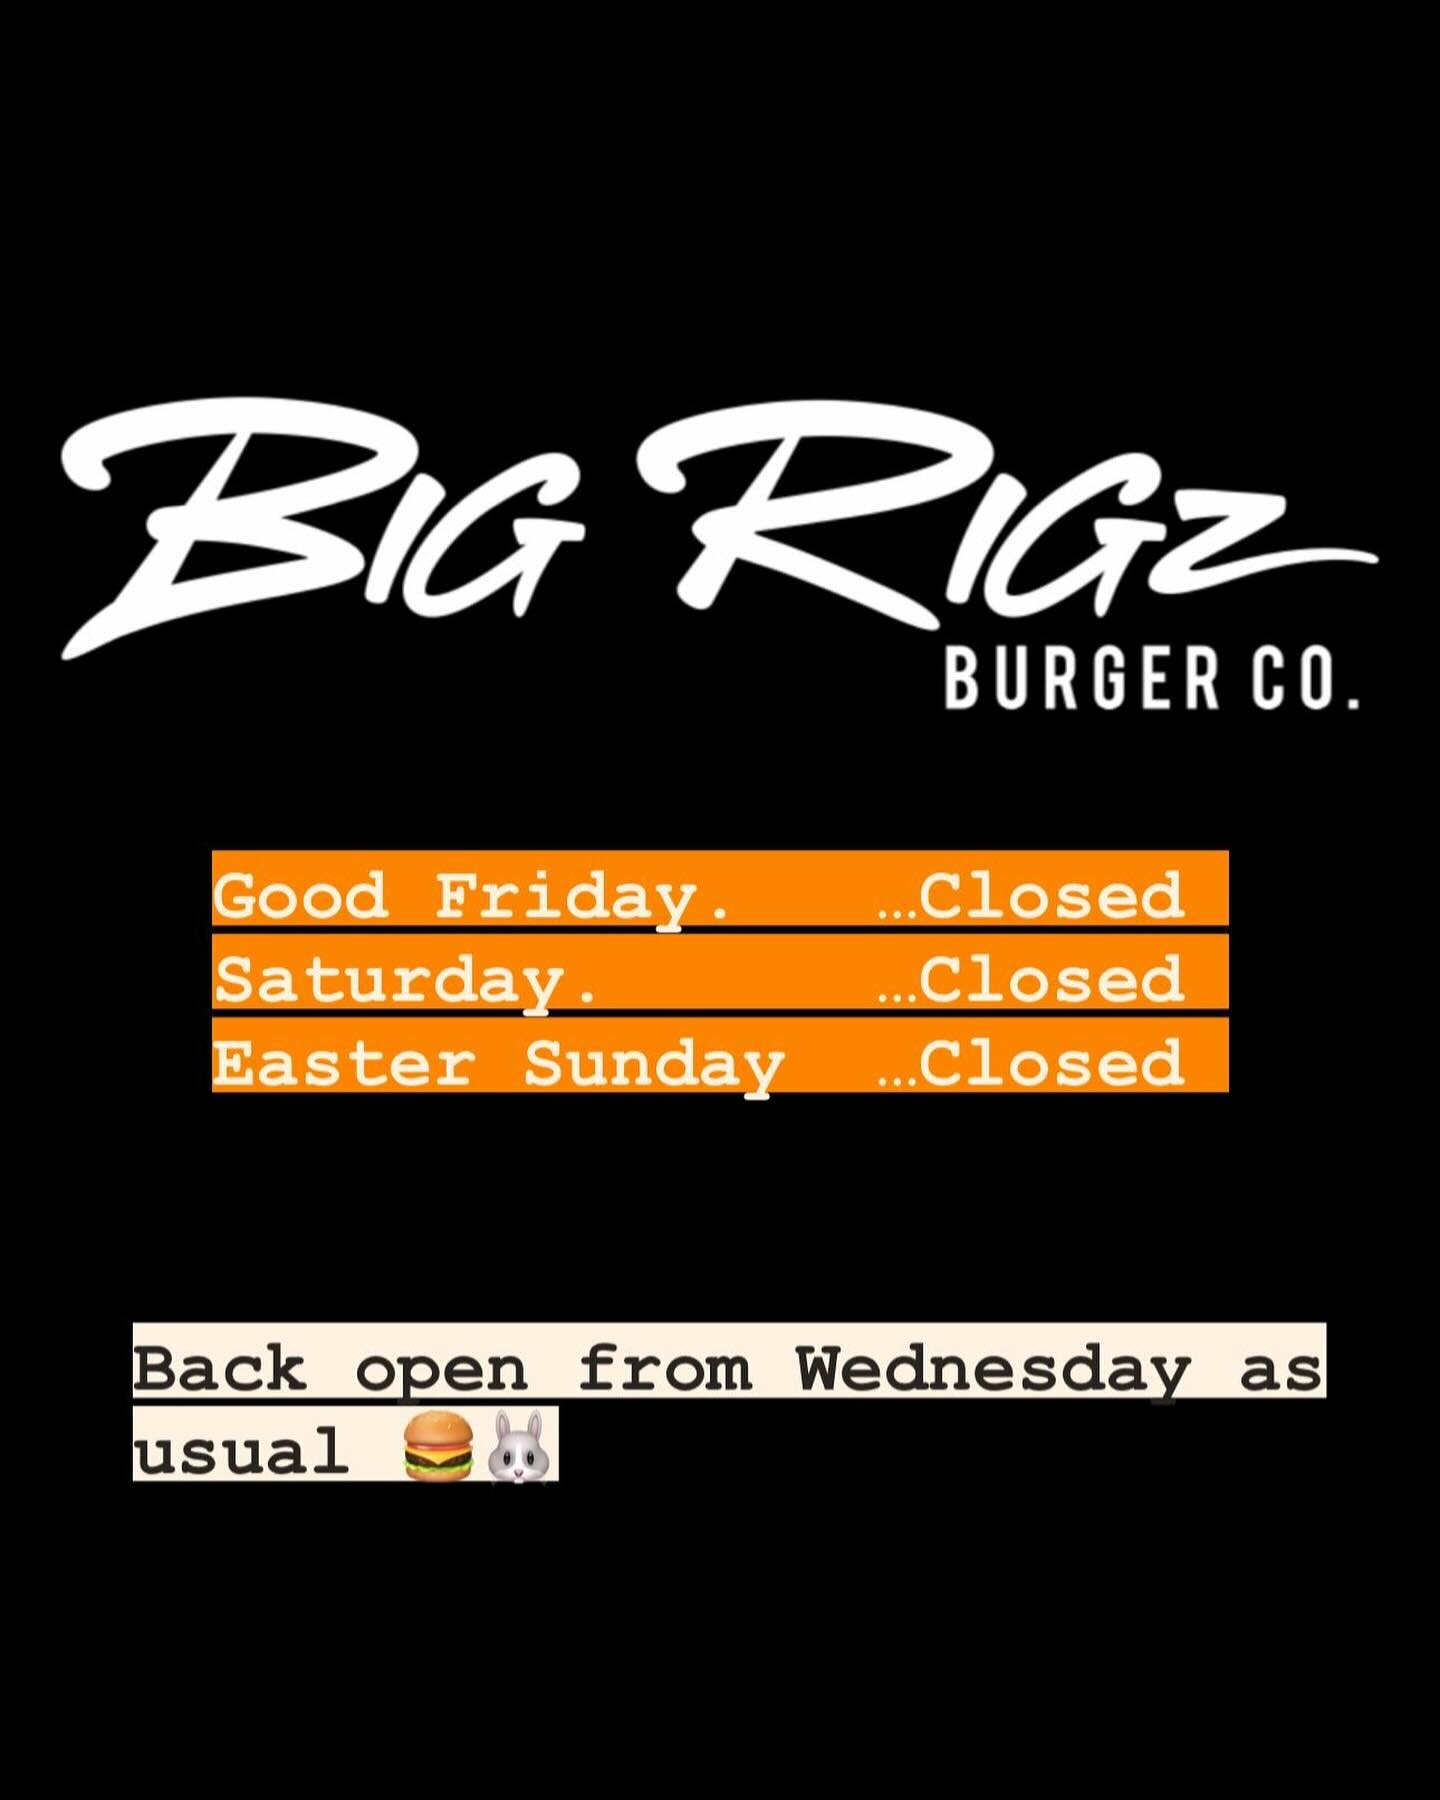 Just a little heads up legends. We will be closed for the Easter weekend for a little break. Come see us tonight for a cheeky pre Easter weekend treat or we&rsquo;ll catch you from next Wednesday when we&rsquo;re back to normal trading hours. Enjoy y